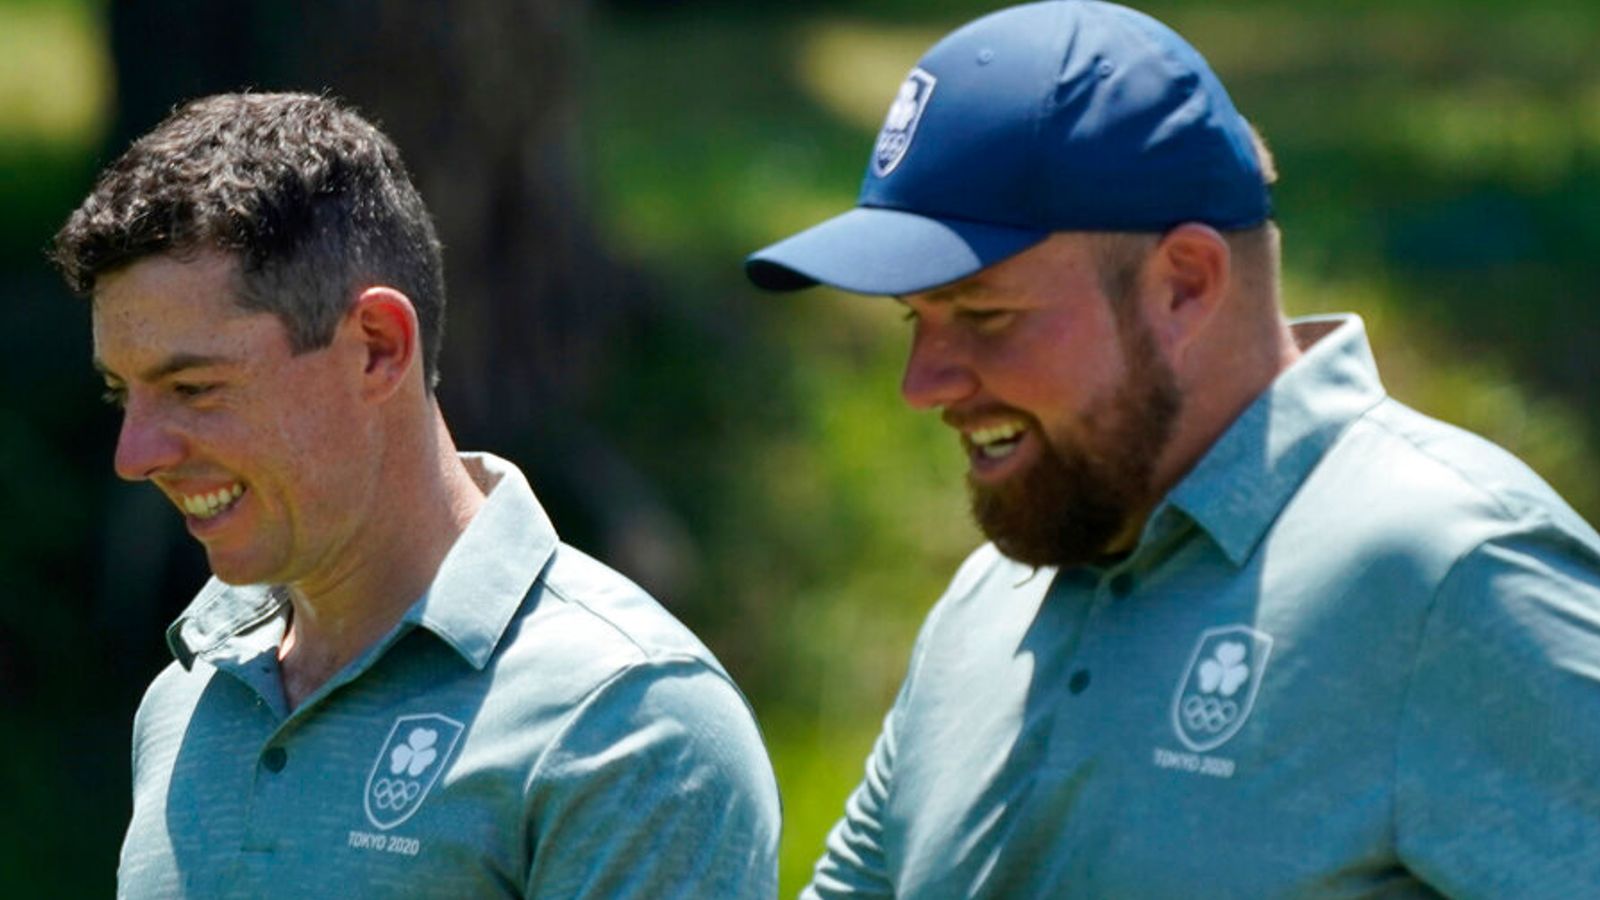 Rory McIlroy and Shane Lowry to team up at Zurich Classic of New Orleans | Golf News